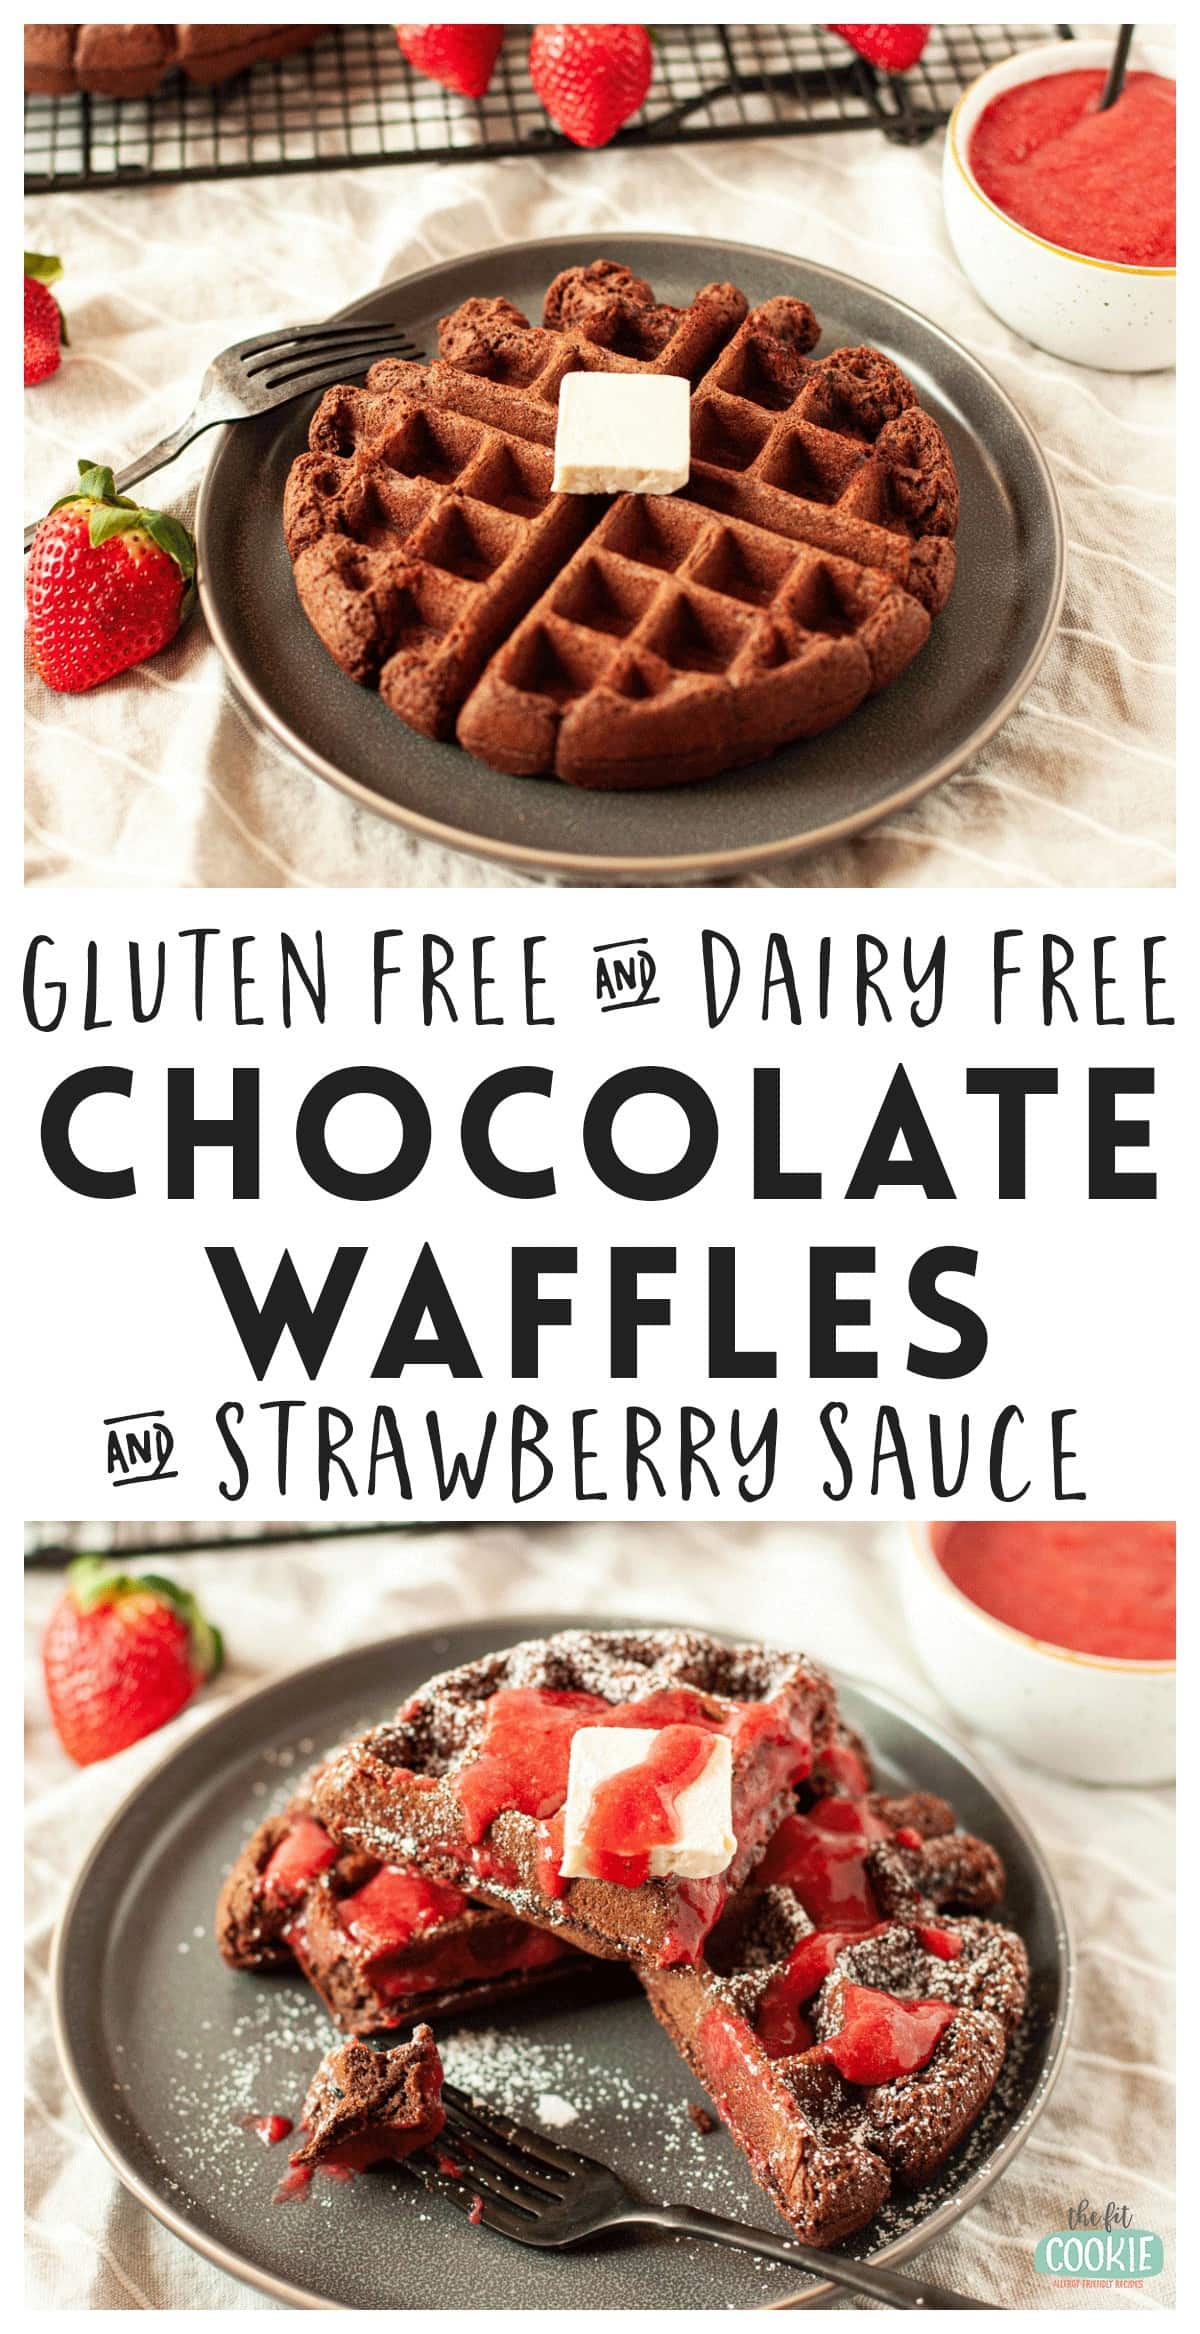 photo collage of chocolate waffles with text